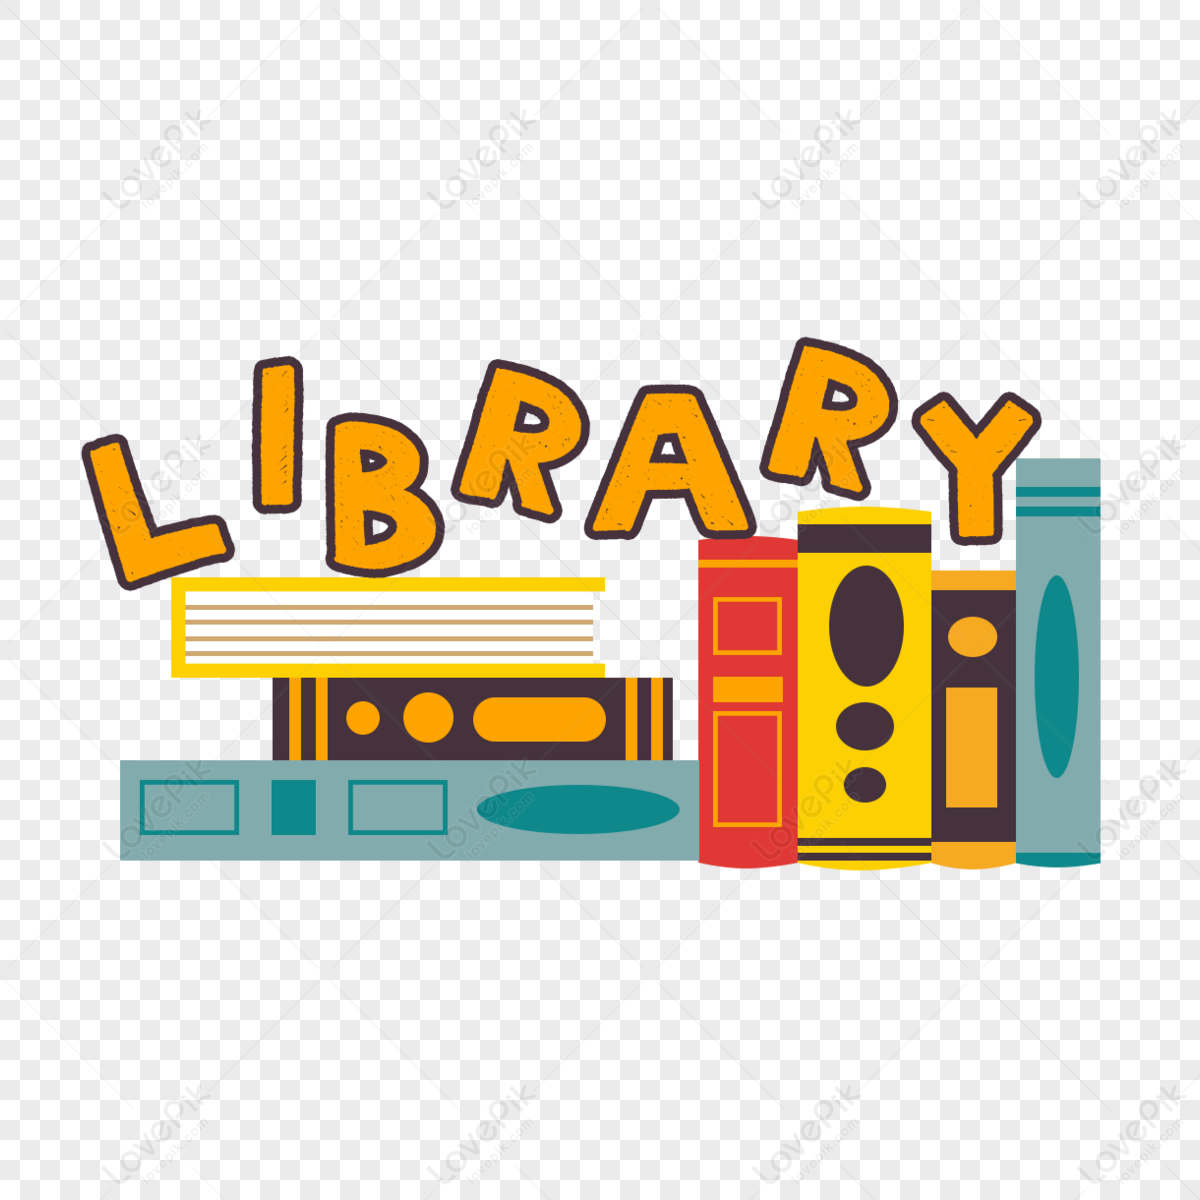 Cartoon books stacked library,knowledge,stack of books,color png picture